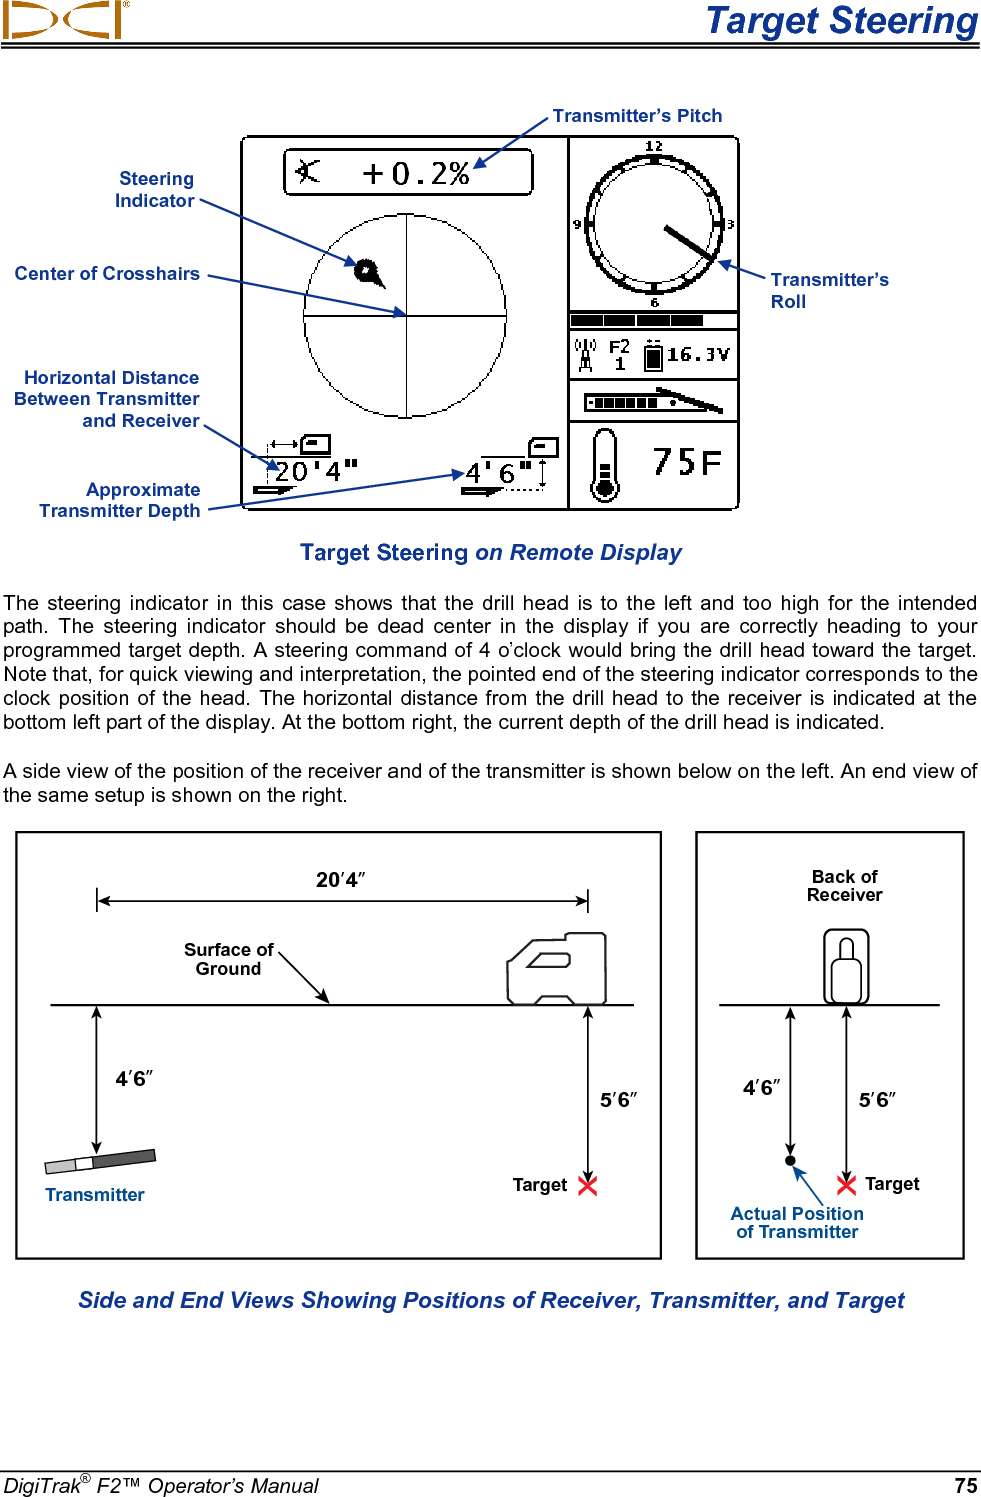  Target Steering DigiTrak® F2™ Operator’s Manual 75  Target Steering on Remote Display The steering indicator in this case shows that the drill head is to the left and too high for the intended path. The steering indicator should be dead center in the display if you are correctly heading to your programmed target depth. A steering command of 4 o’clock would bring the drill head toward the target. Note that, for quick viewing and interpretation, the pointed end of the steering indicator corresponds to the clock position of the head. The horizontal distance from the drill head to the receiver is indicated at the bottom left part of the display. At the bottom right, the current depth of the drill head is indicated. A side view of the position of the receiver and of the transmitter is shown below on the left. An end view of the same setup is shown on the right. 20’4”4’6”5’6”5’6”4’6”TransmitterBack ofReceiverActual Positionof TransmitterTarget TargetSurface ofGround Side and End Views Showing Positions of Receiver, Transmitter, and Target Horizontal Distance Between Transmitter and Receiver  Approximate Transmitter Depth  Transmitter’s Roll  Transmitter’s Pitch Steering Indicator  Center of Crosshairs + 